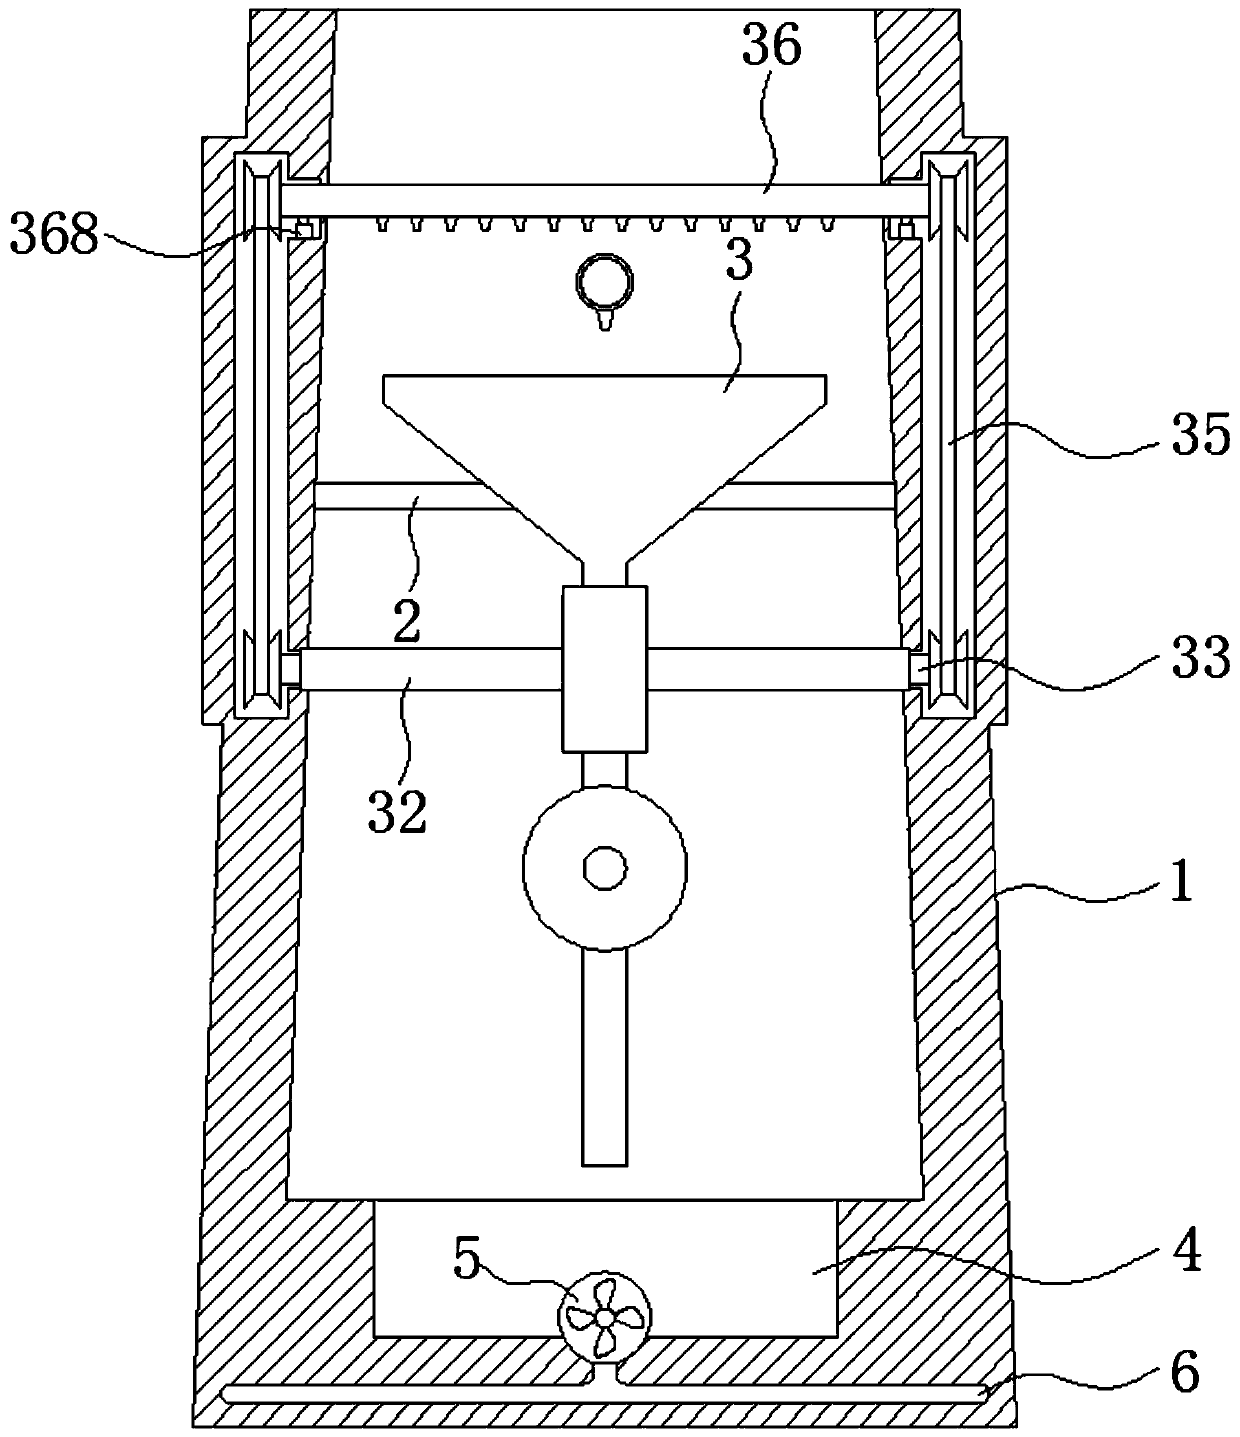 Rotary spraying device for desulfurization process of desulfurization tower